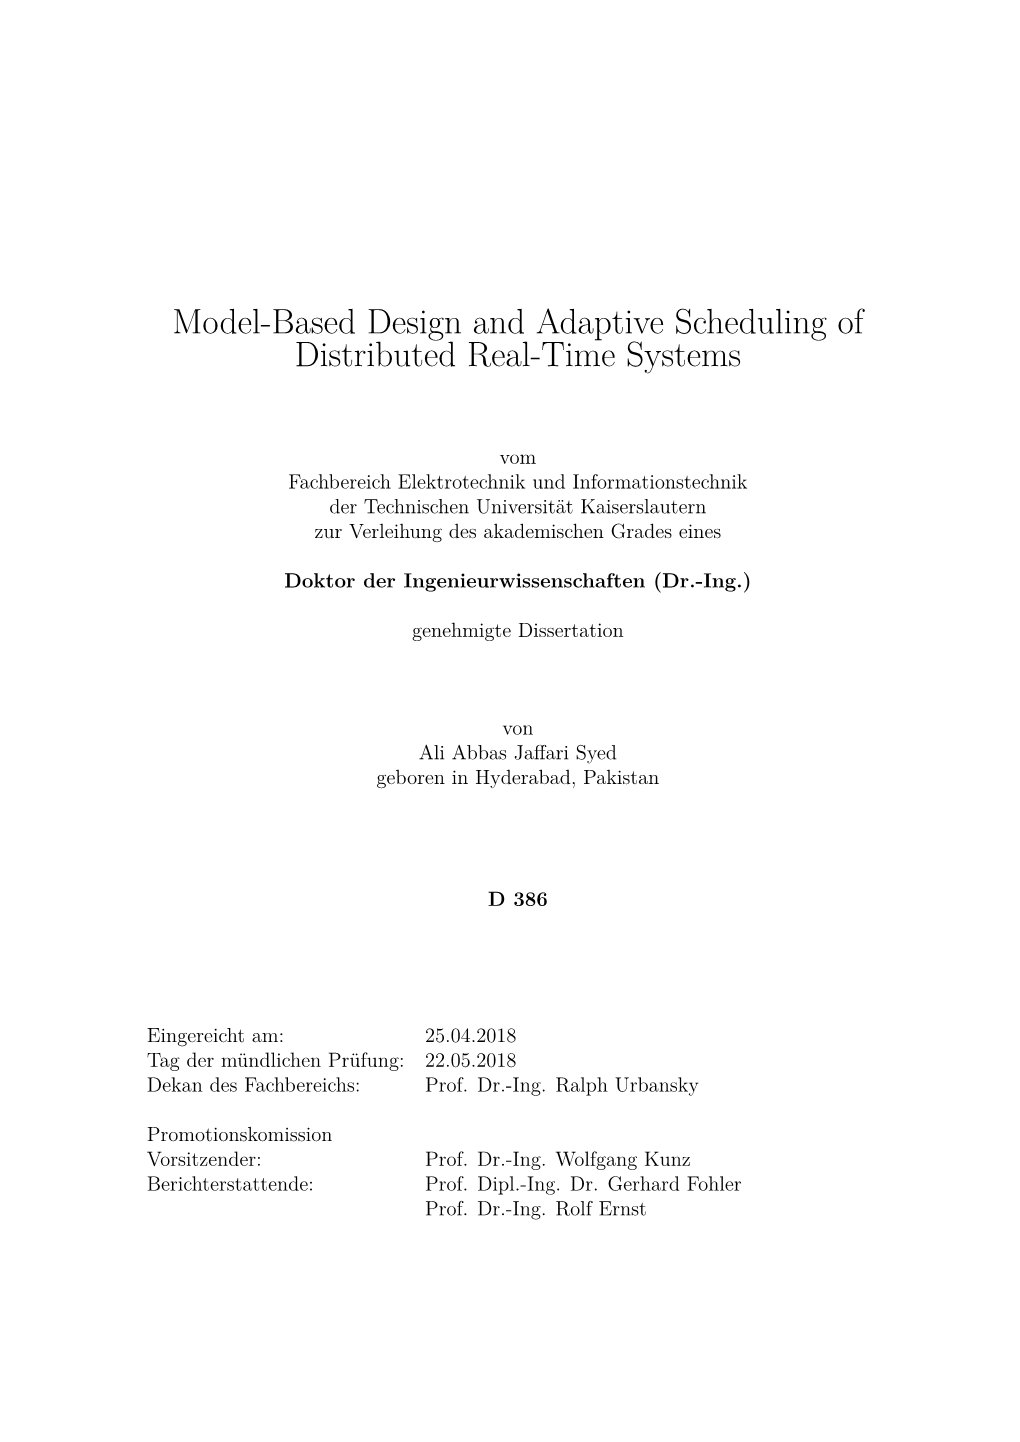 Model-Based Design and Adaptive Scheduling of Distributed Real-Time Systems